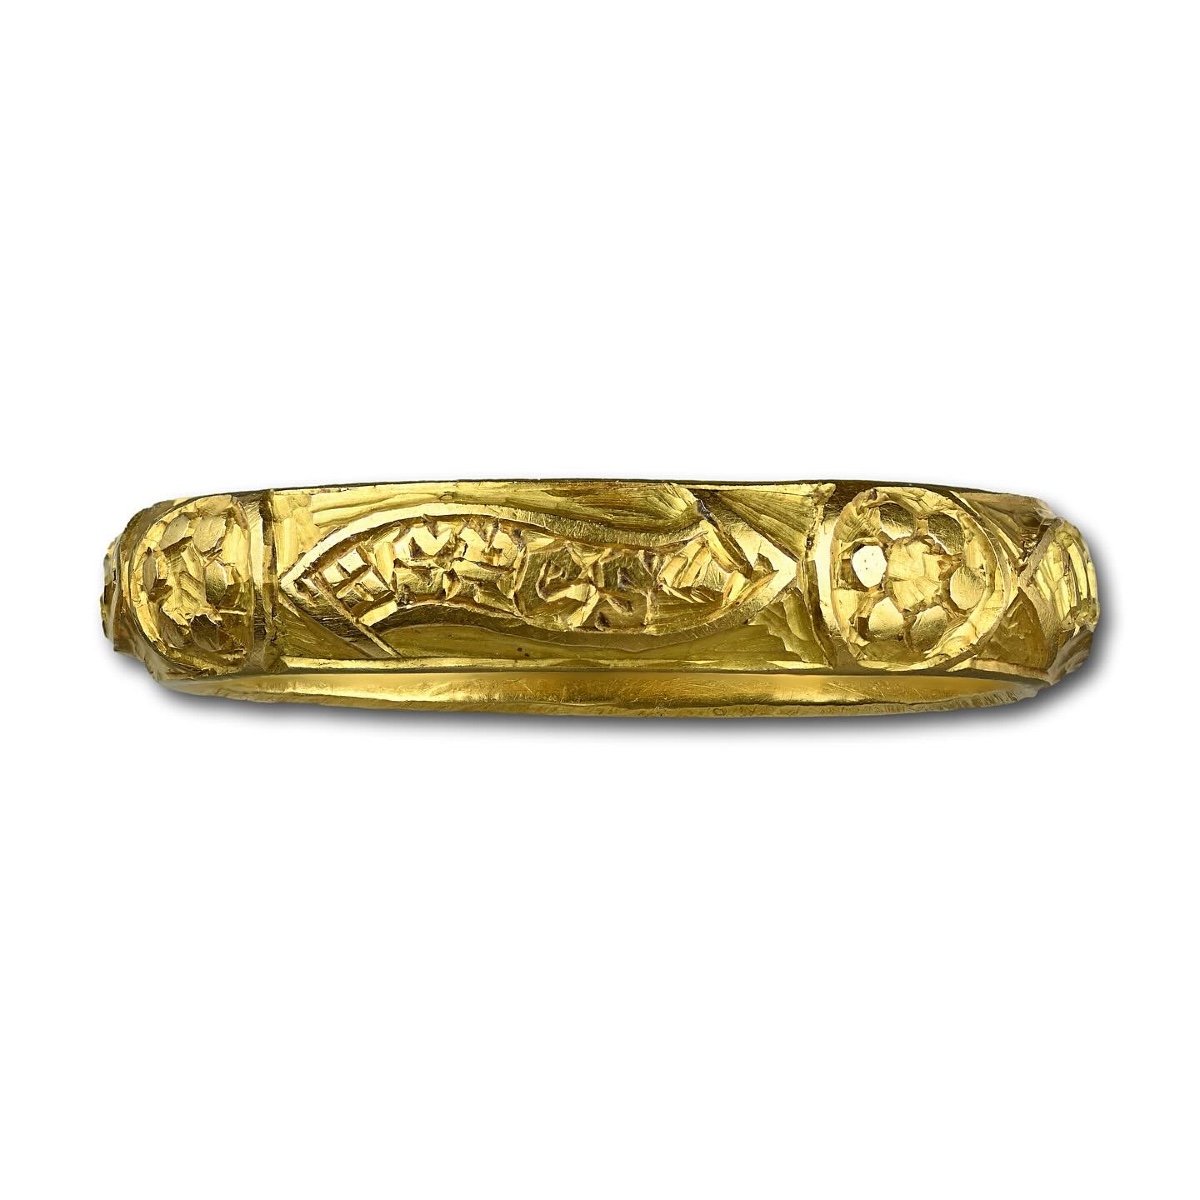 Gold Posy Ring Engraved With Black Letter. Probably English, 15th Century.